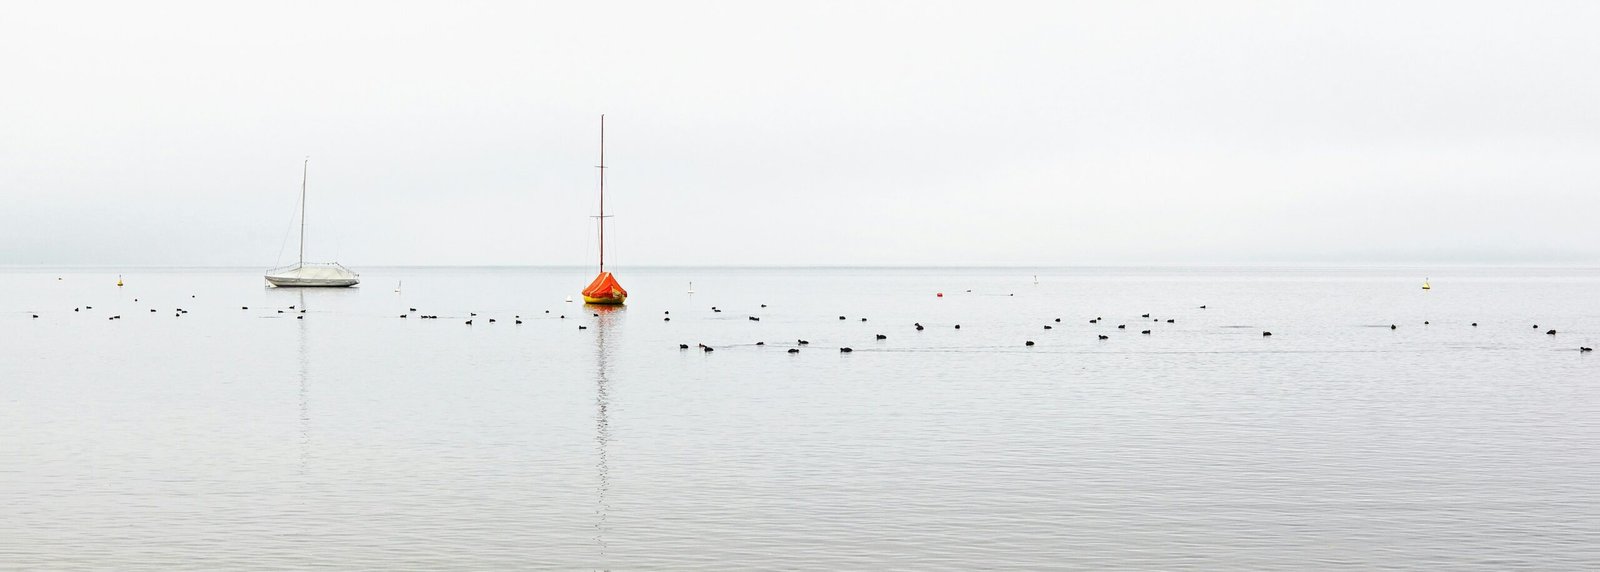 birds on body of water during daytime